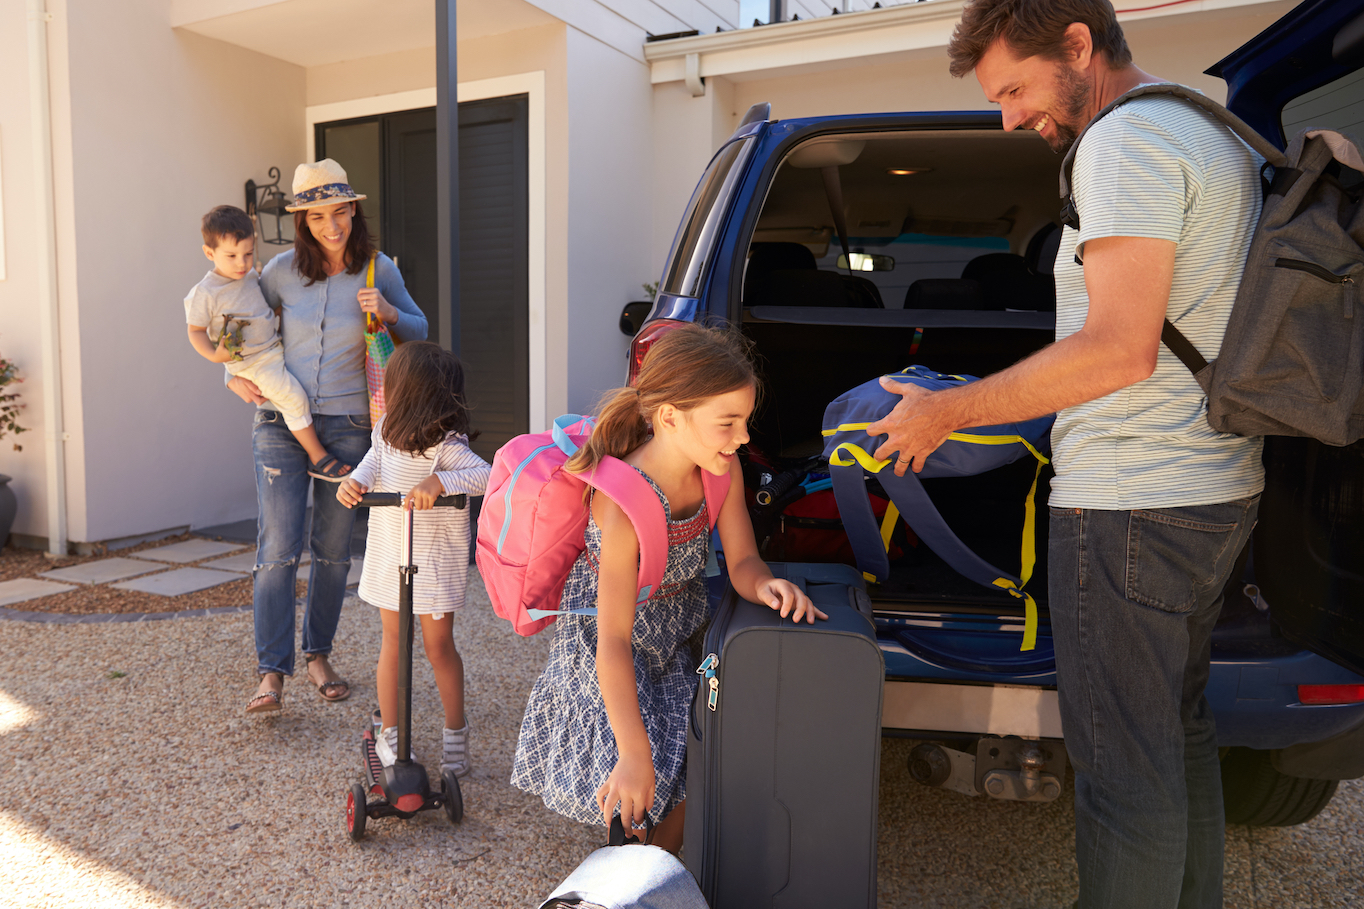 Couple with three children unpacking car trunk